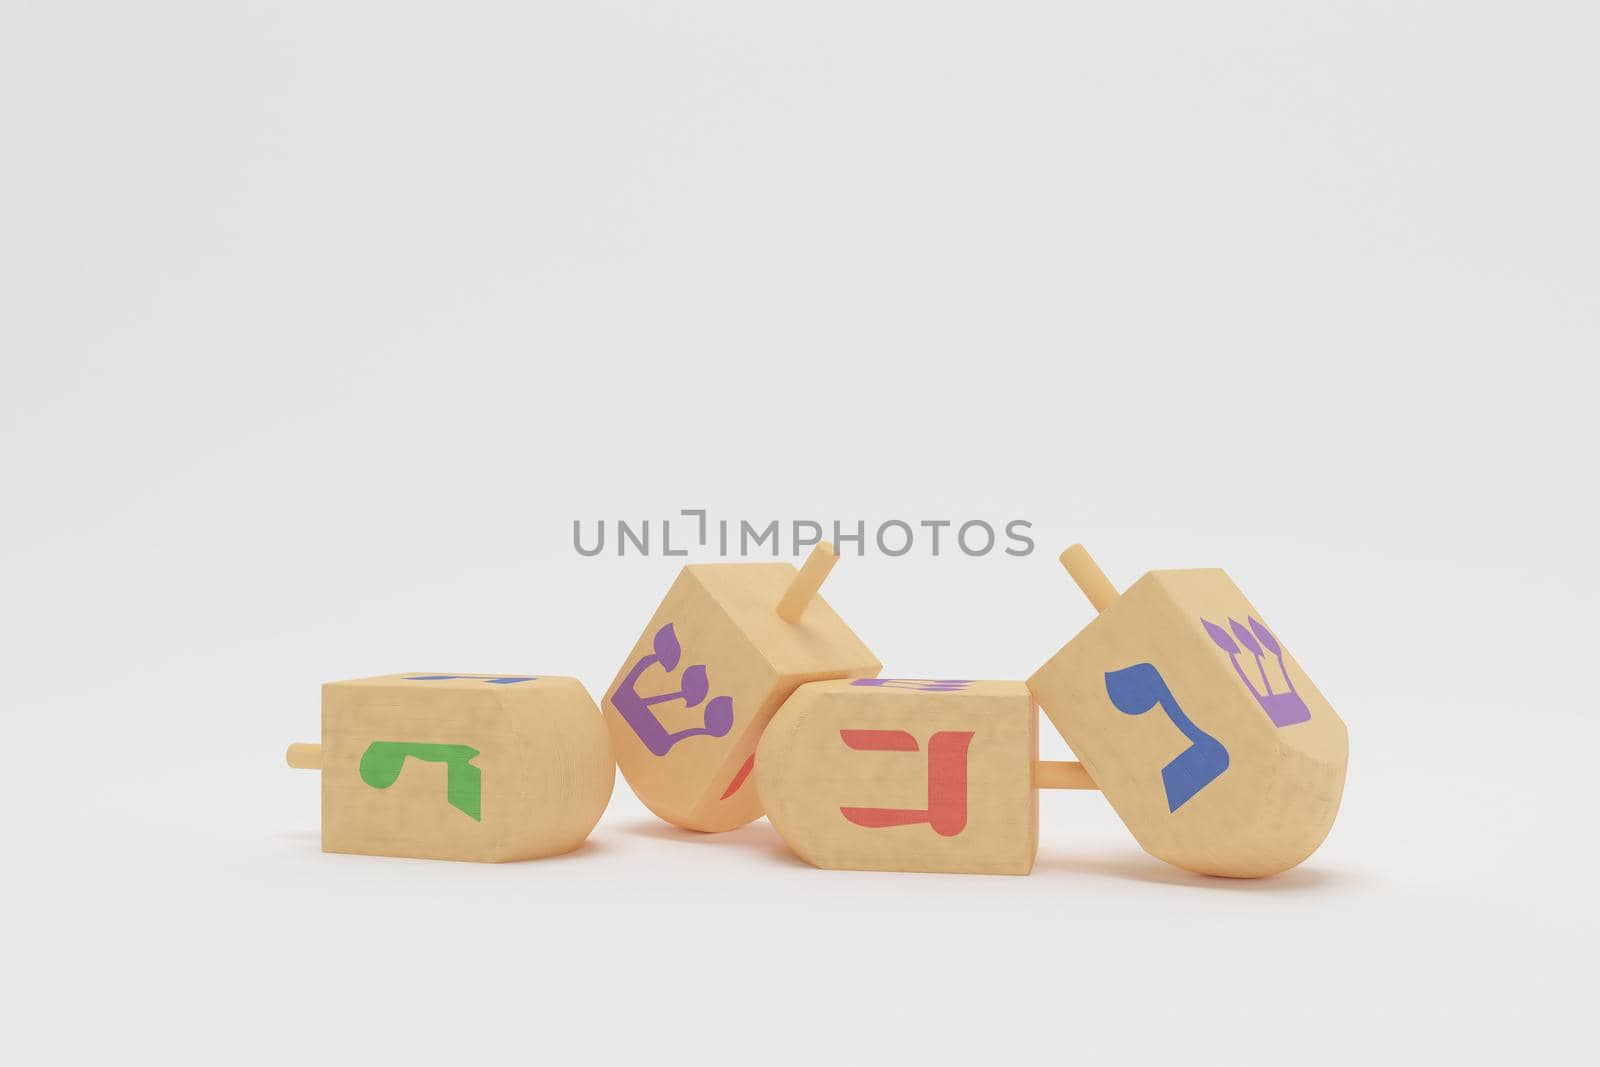 3d rendering Image of Jewish holiday Hanukkah with wooden dreidels or spinning top on a  white background.